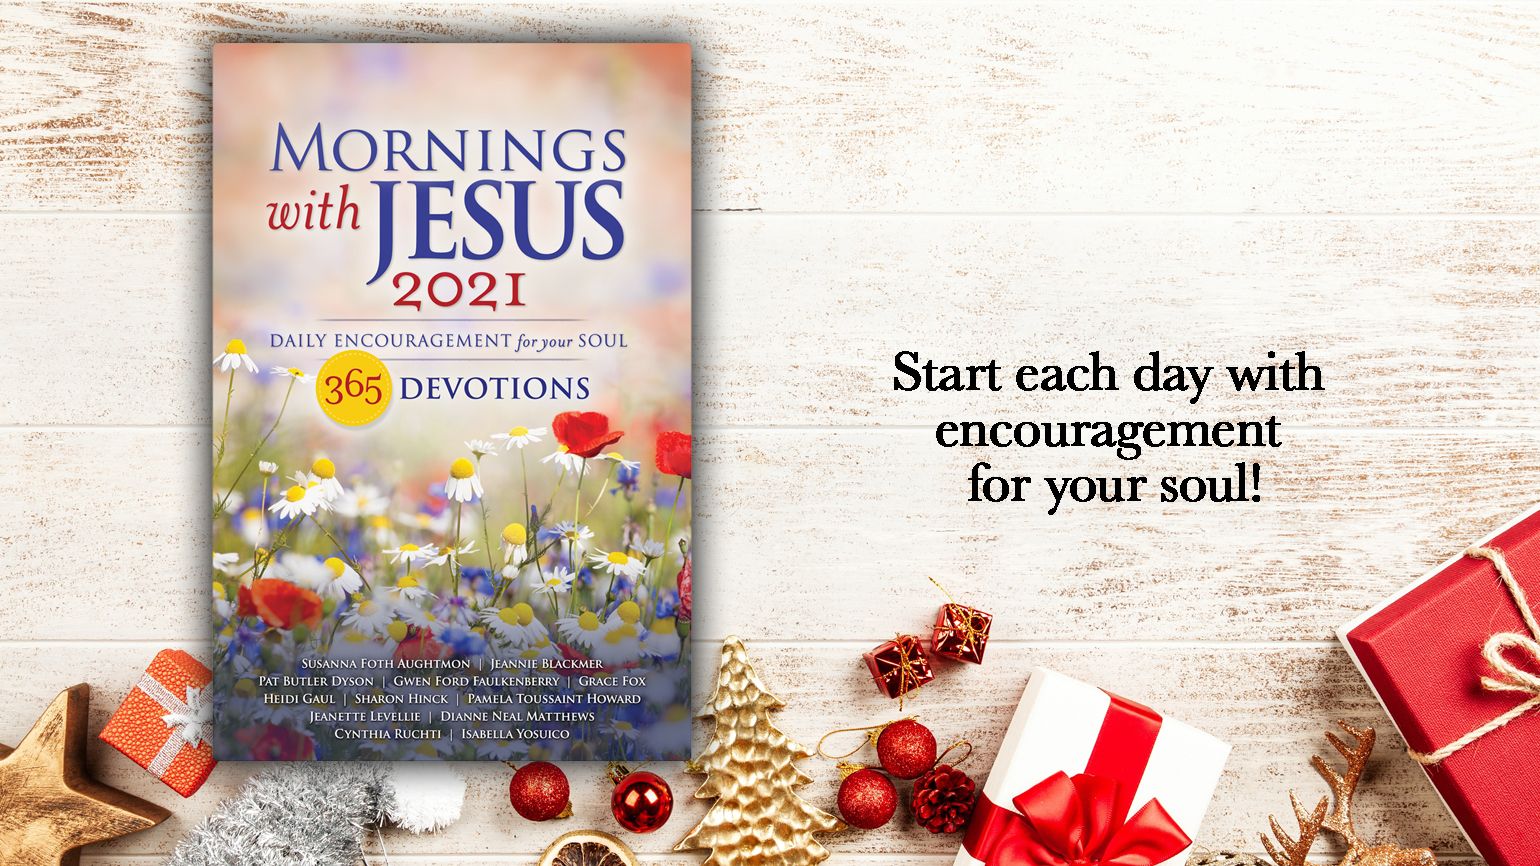 Mornings with Jesus 2021